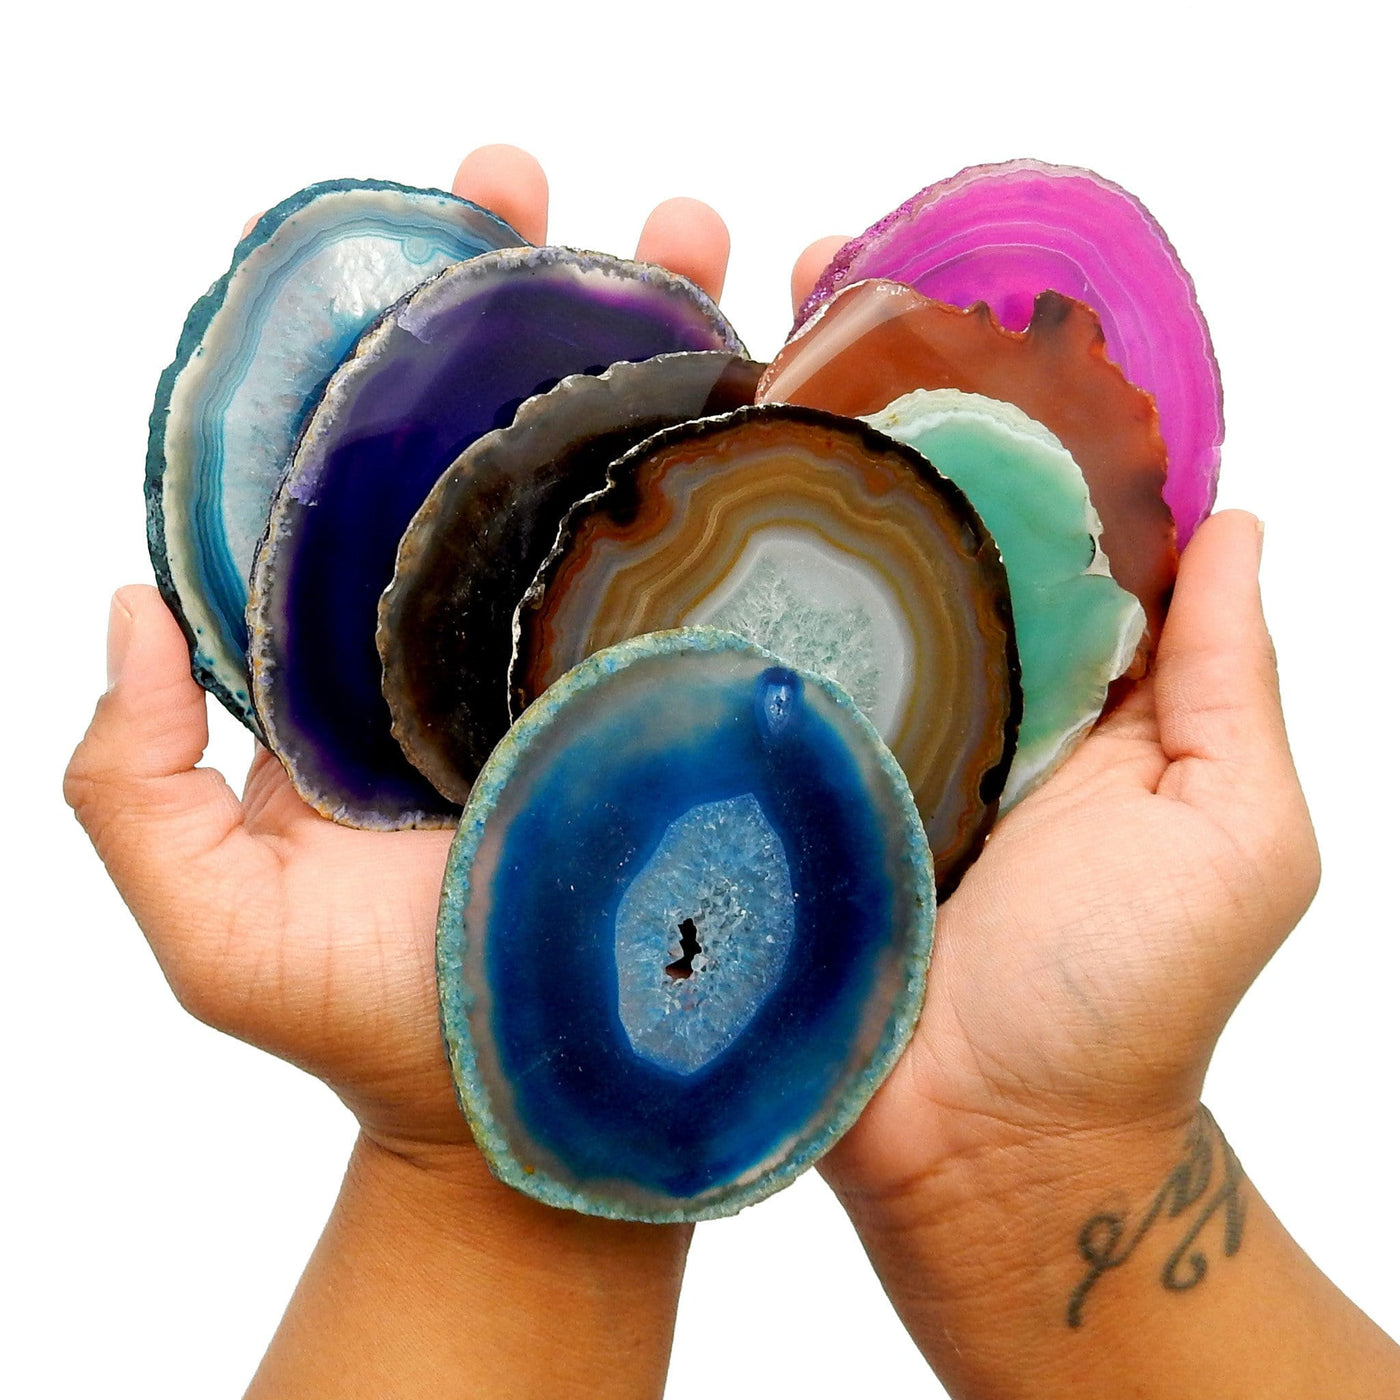 Hands holding up agate Slices of various colors on white background